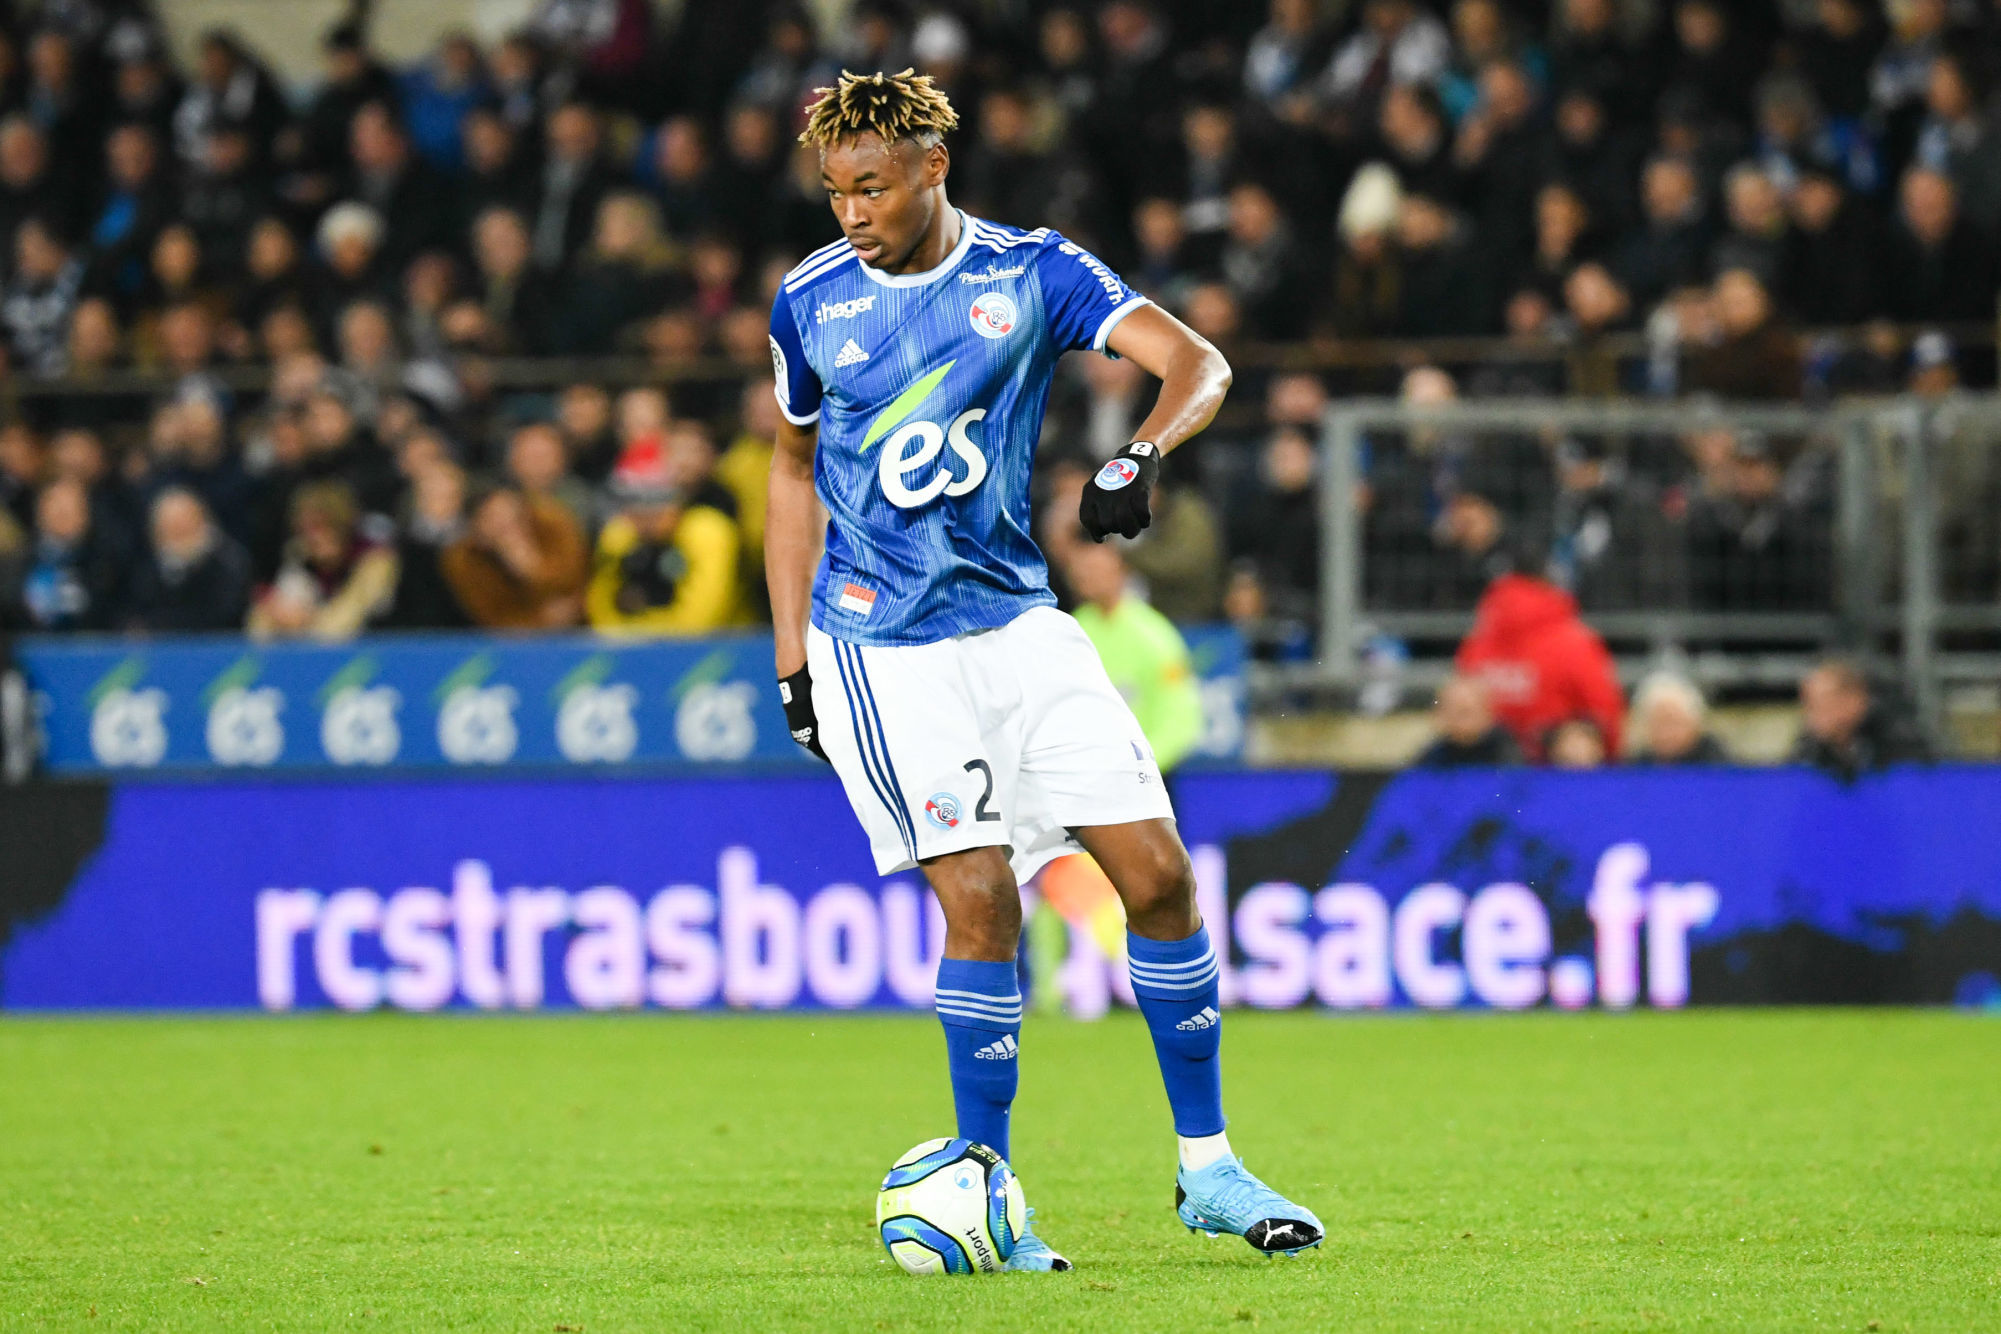 Mohamed SIMAKAN of Strasbourg during the Ligue 1 match between RC Strasbourg and Toulouse FC at Stade de la Meinau on December 7, 2019 in Strasbourg, France. (Photo by Sebastien Bozon/Icon Sport) - Mohamed SIMAKAN - Stade de la Meinau - Strasbourg (France)